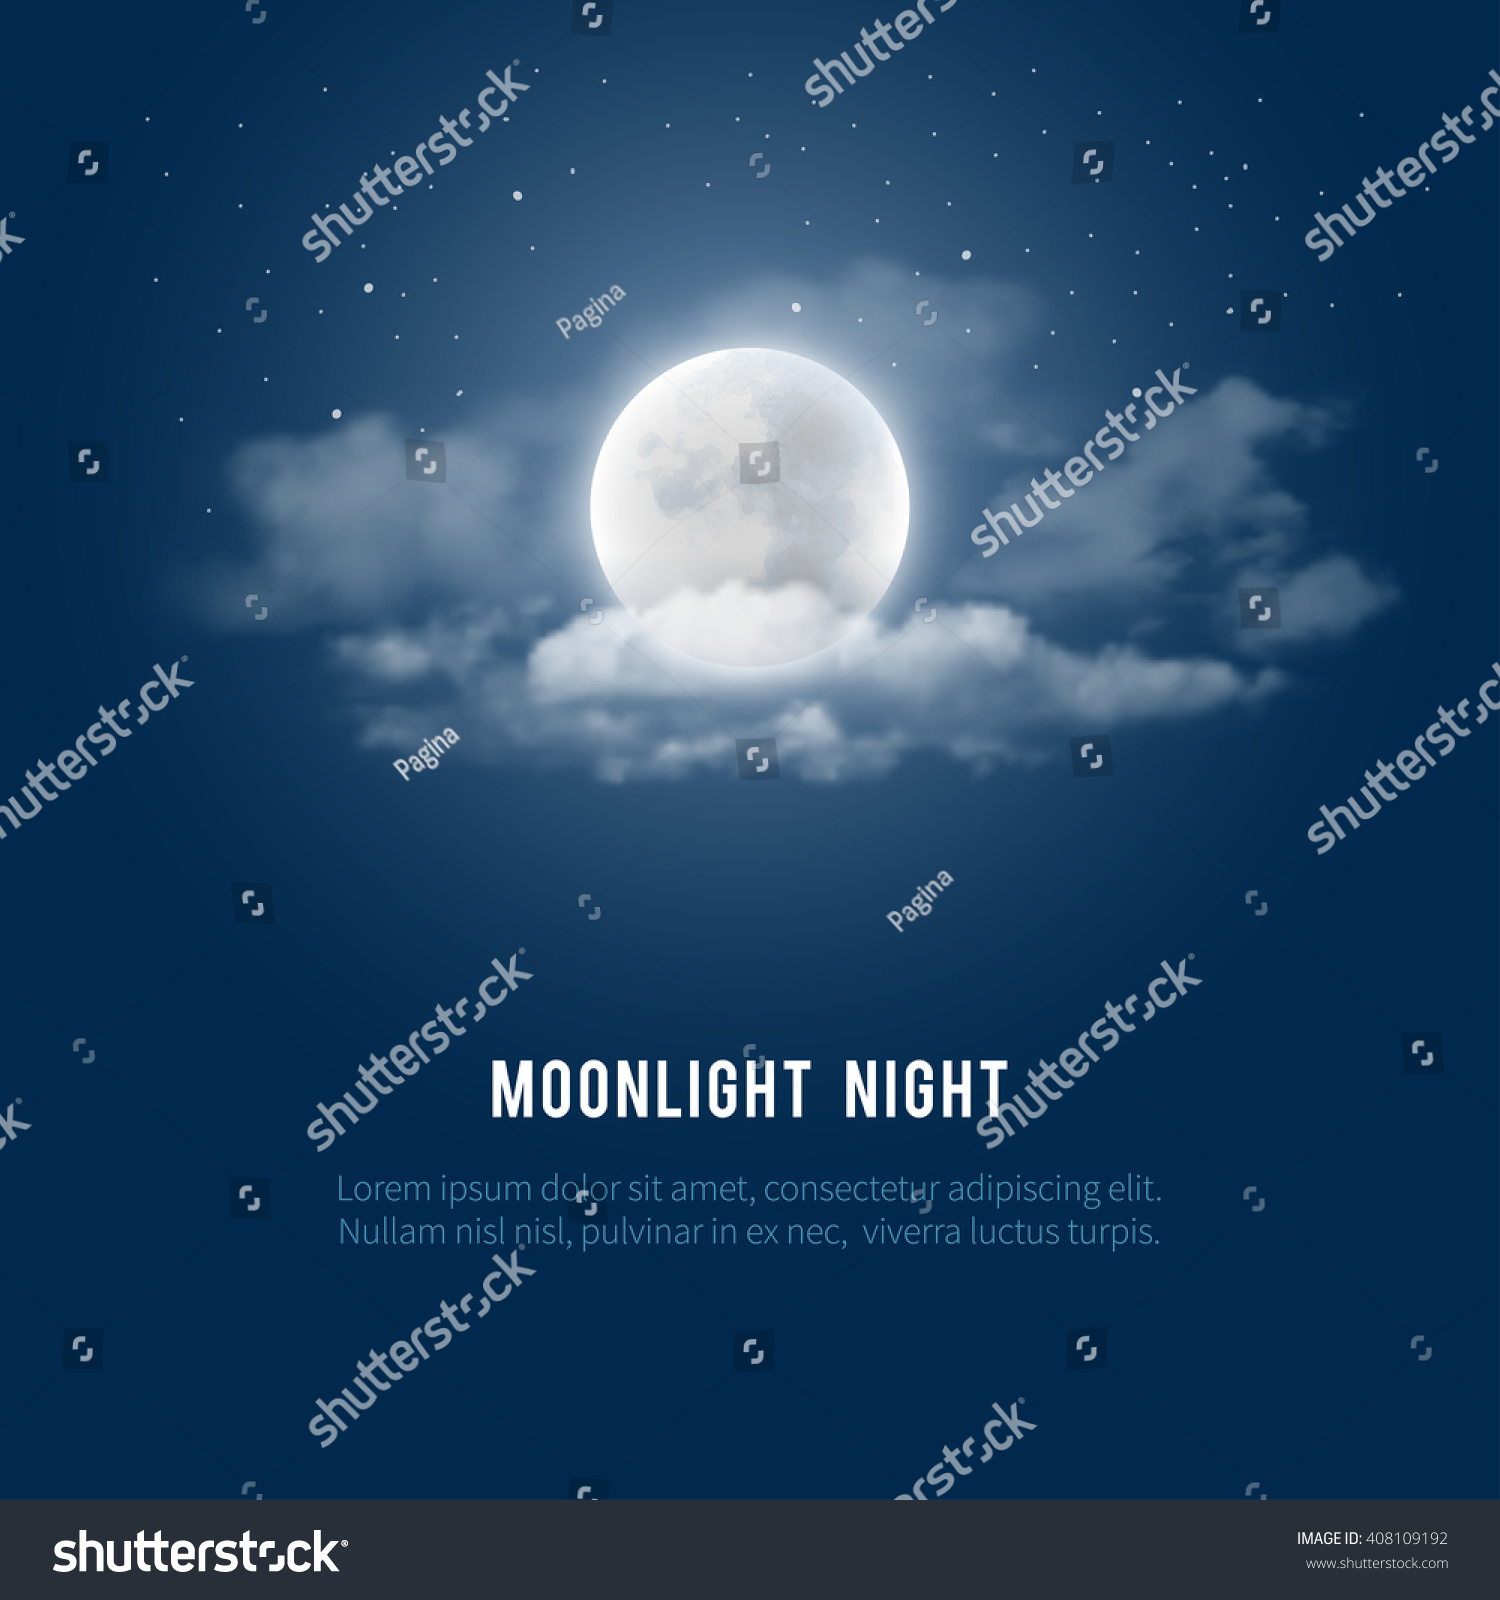 Mystical Night sky background with full moon, clouds and stars. Moonlight night. Vector illustration. #408109192